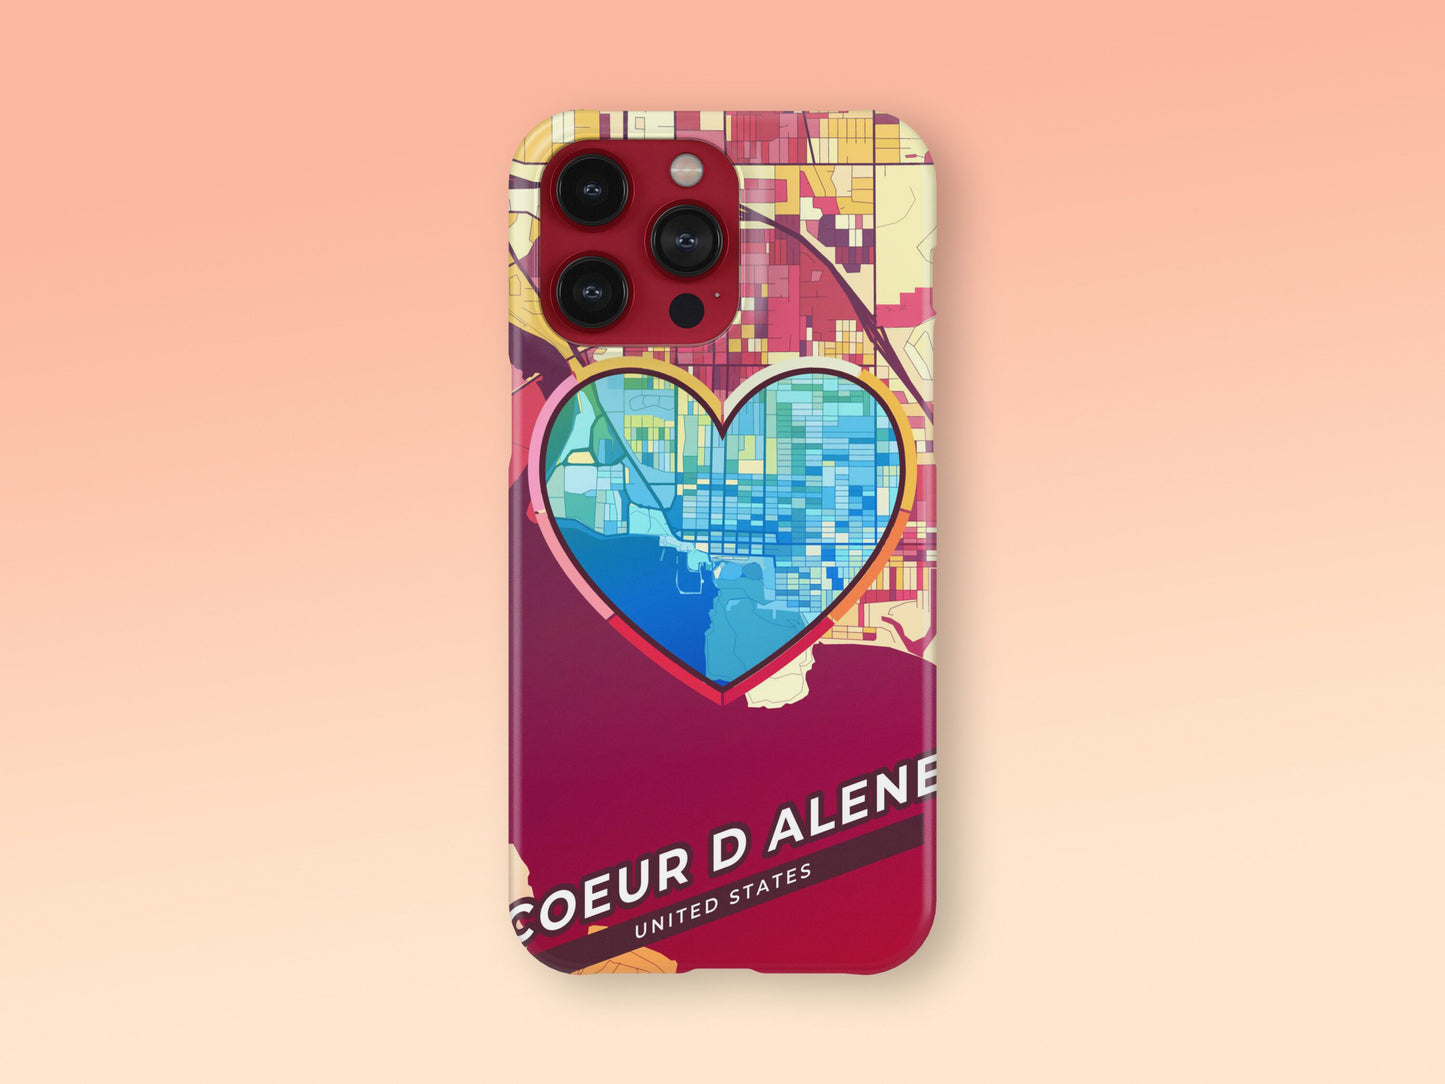 Coeur D Alene Idaho slim phone case with colorful icon. Birthday, wedding or housewarming gift. Couple match cases. 2